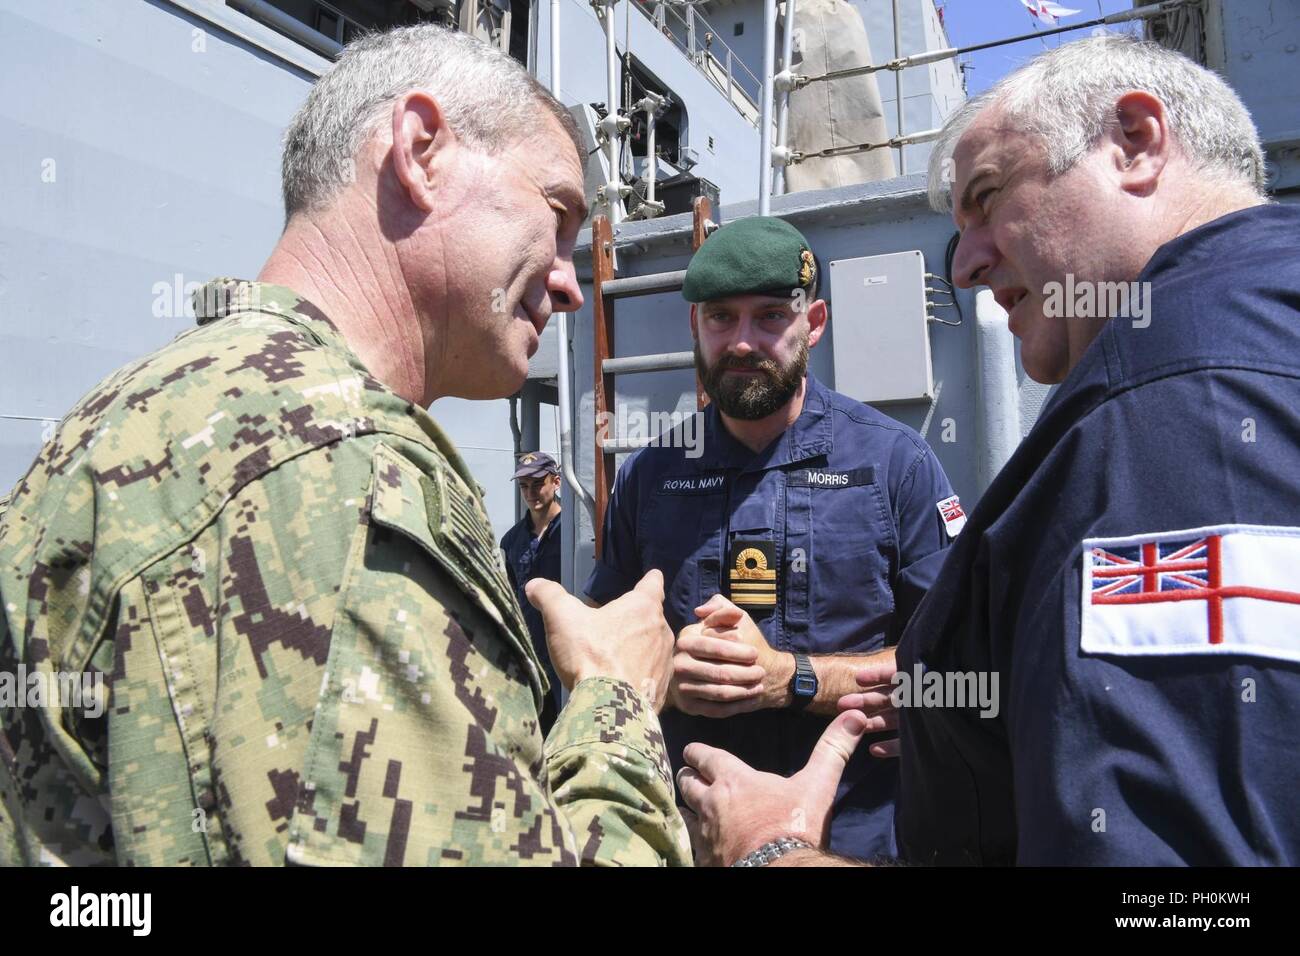 ARABIAN GULF (June 17, 2018) Vice Adm. Scott Stearney, commander of U.S. Naval Forces Central Command, U.S. 5th Fleet, Combined Maritime Forces, left, speaks with members of the Royal Navy aboard HMS Middleton during Mine Countermeasures Exercise (MCMEX) 18-2. The bilateral exercise enhances cooperation, mutual MCM capabilities and interoperability between the U.S. and U.K., demonstrating the shared commitment of ensuring unfettered operations of naval and support vessels, as well as commercial shipping movements, throughout the maritime domain. Stock Photo